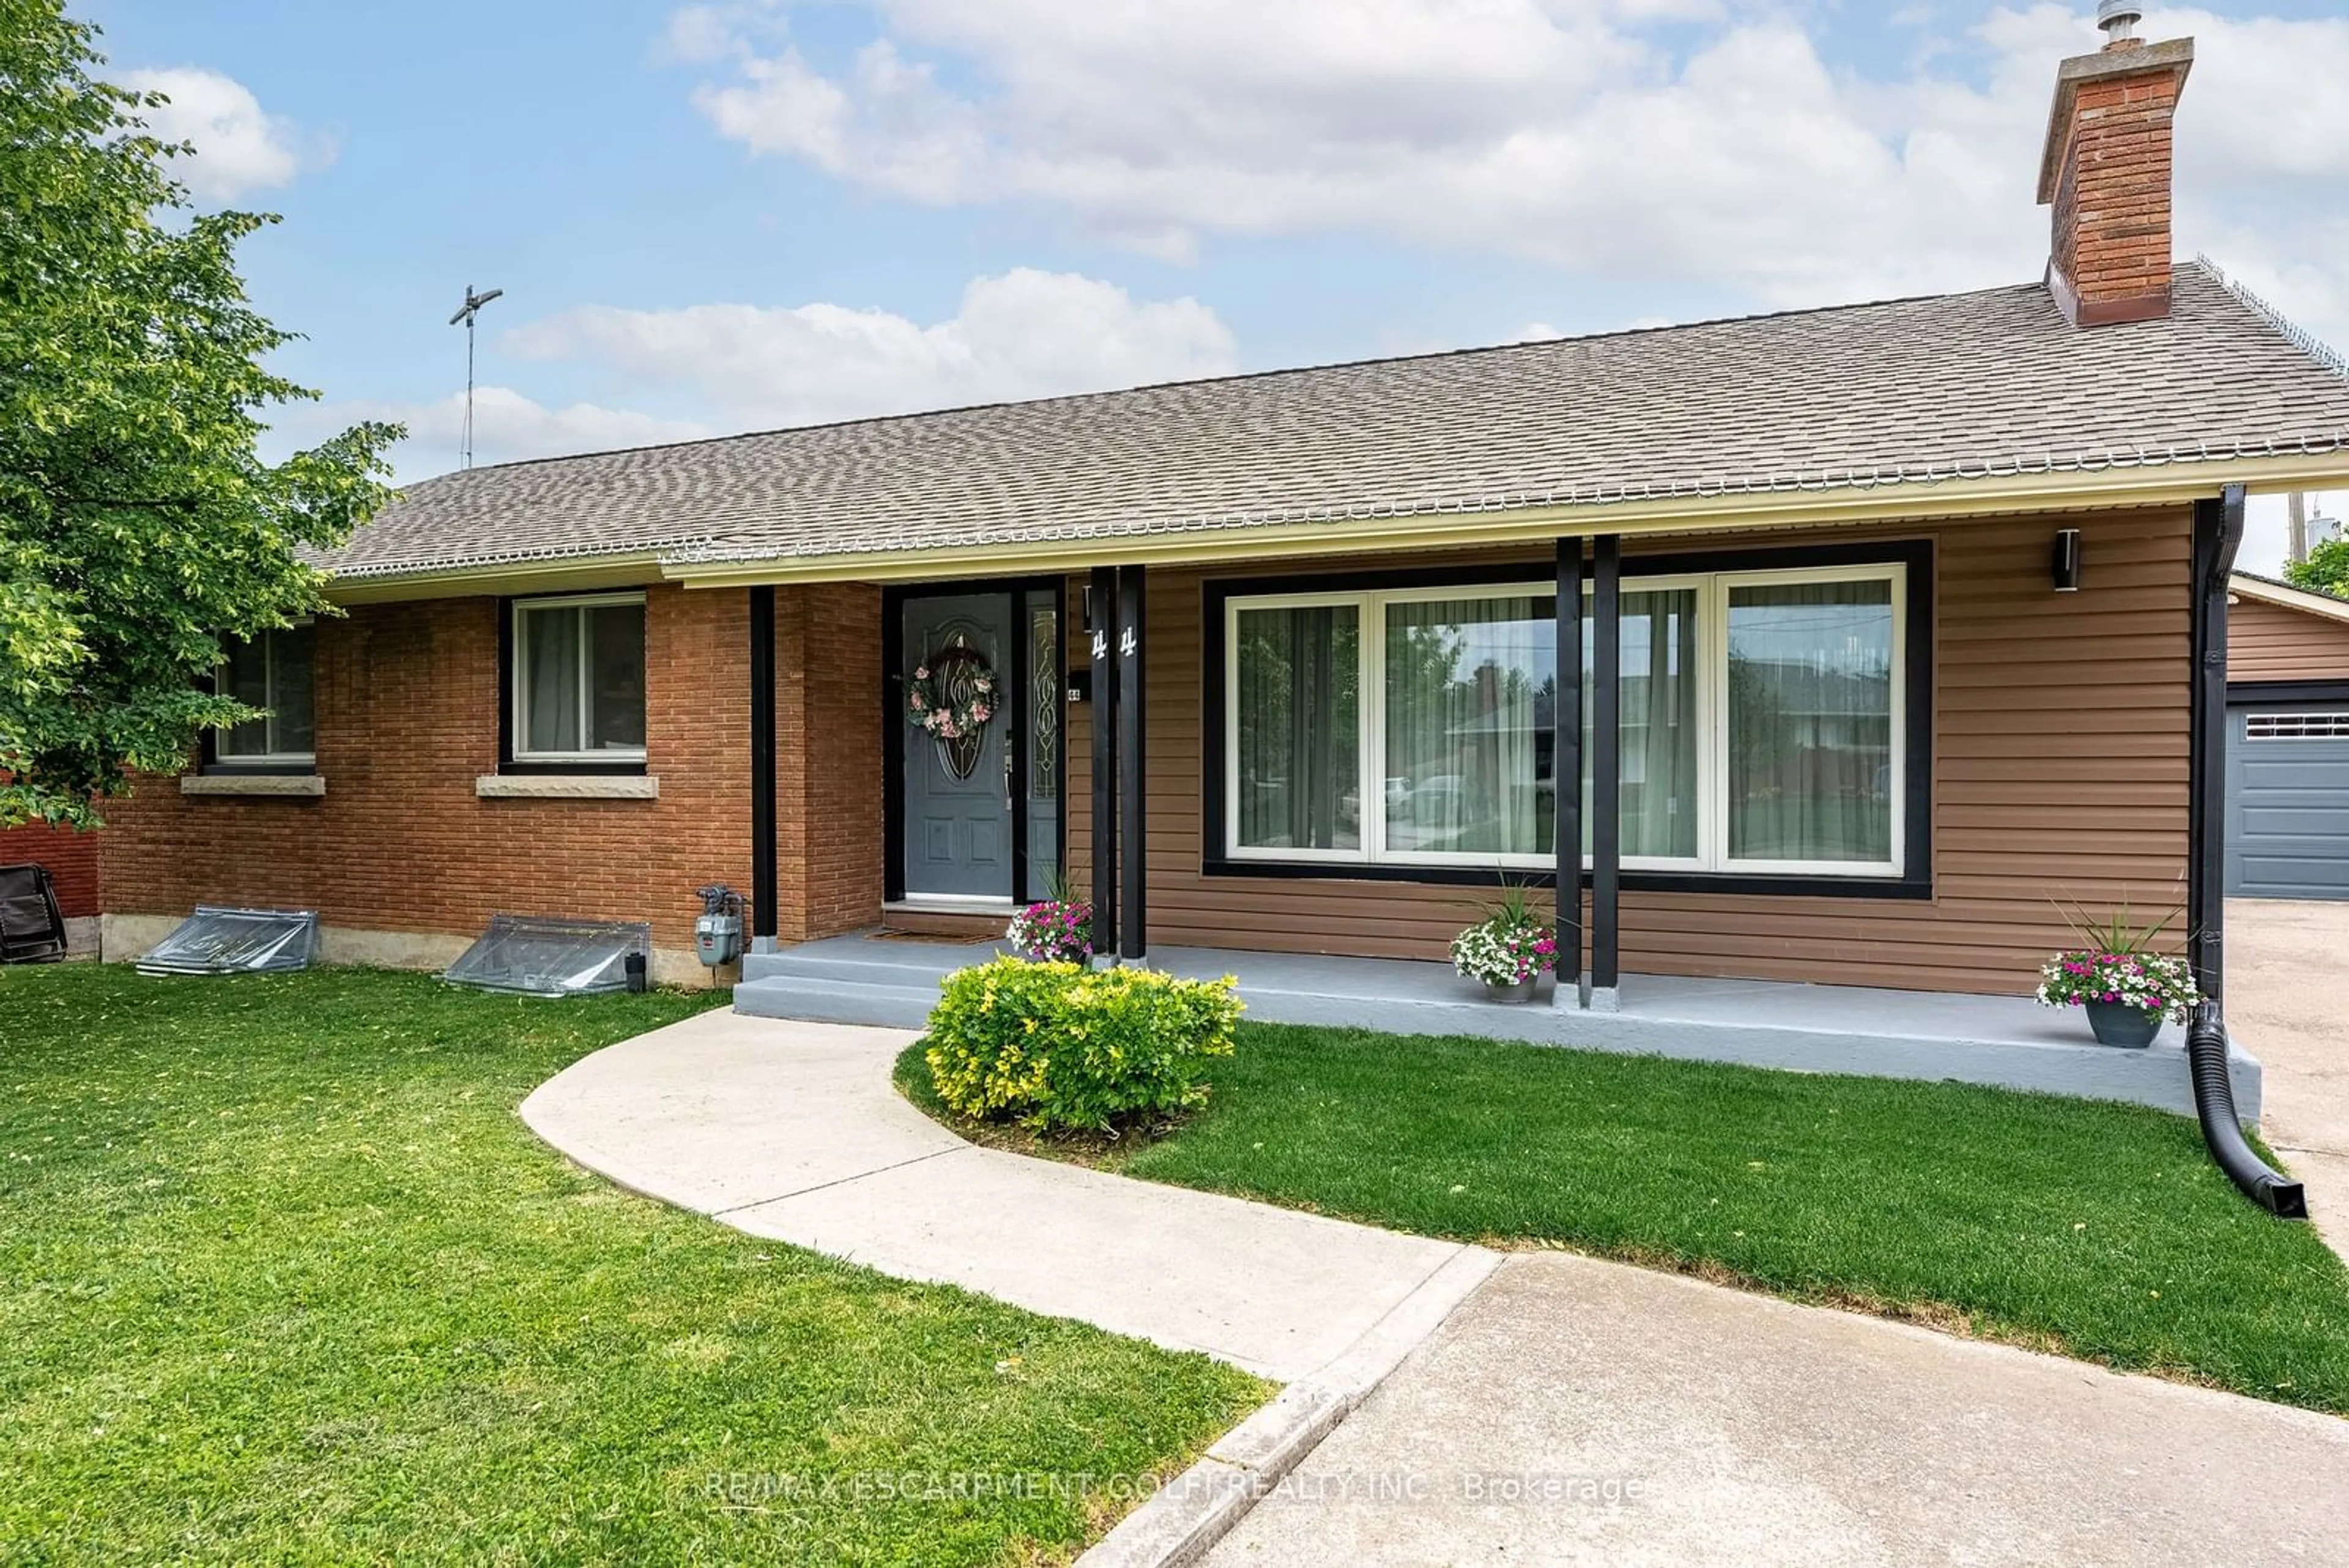 Home with brick exterior material for 44 Hillgarden Rd, St. Catharines Ontario L2T 2W8